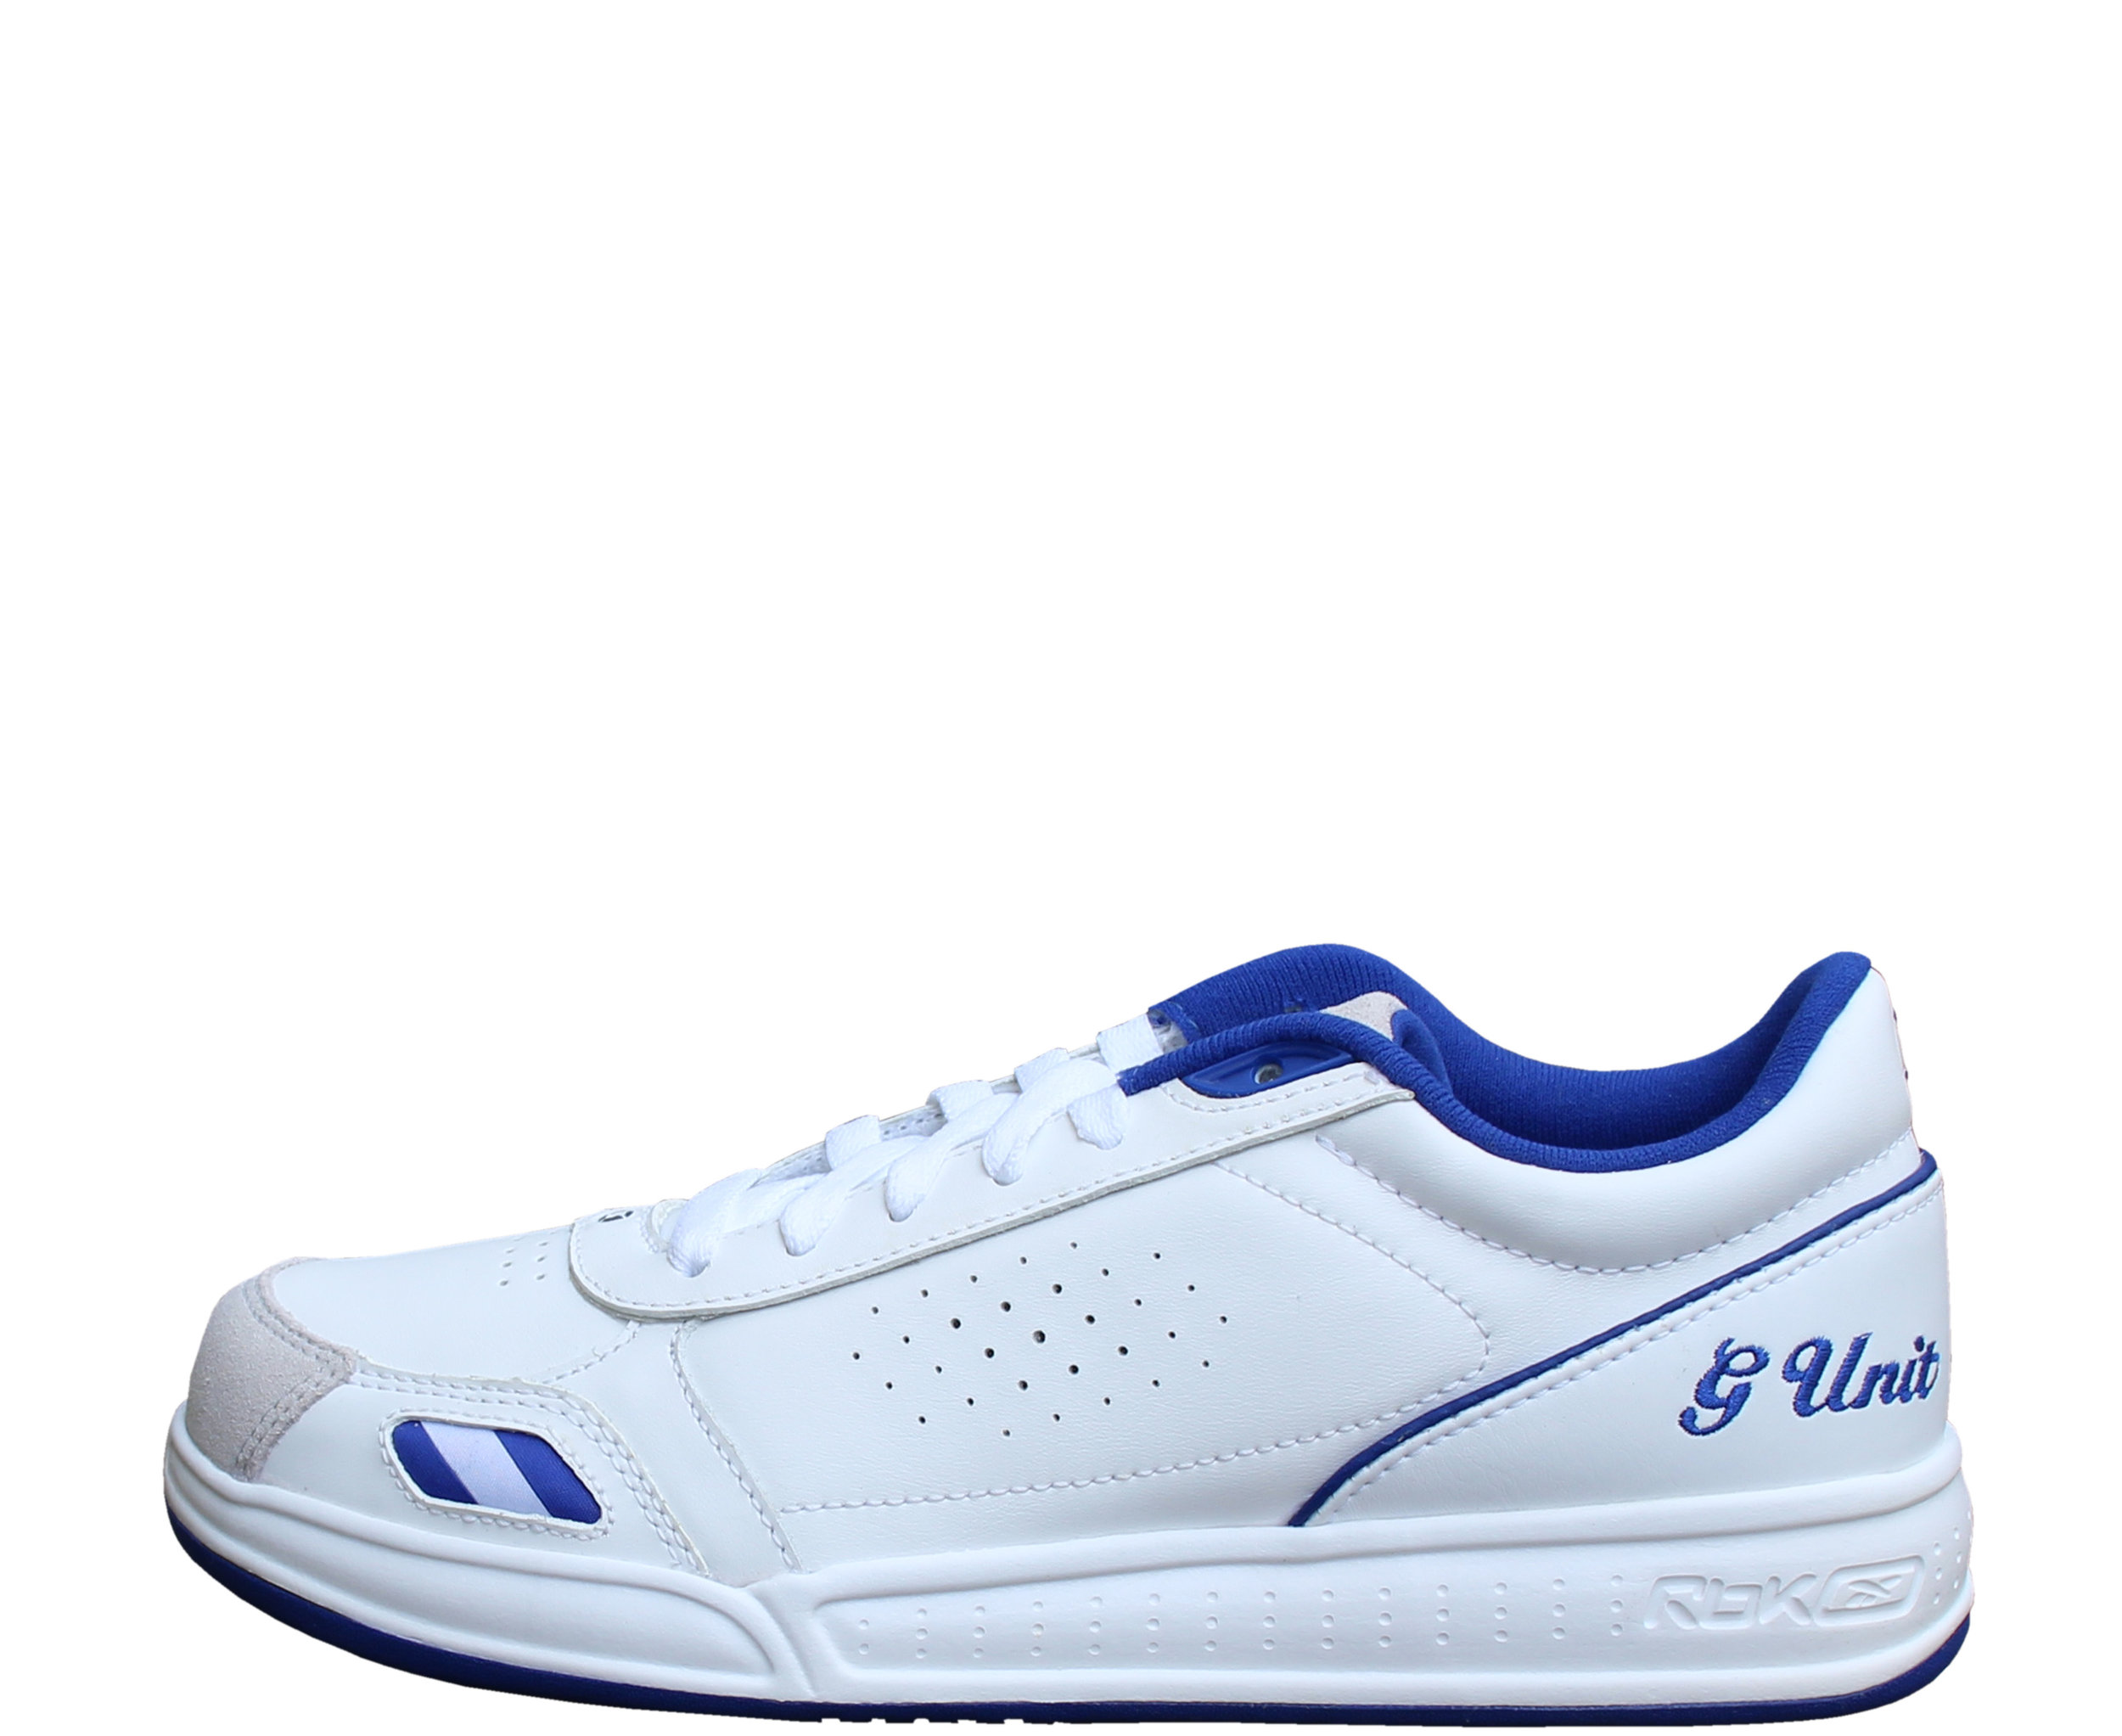 Kids Reebok G Unit III White / Royal DS — Roots